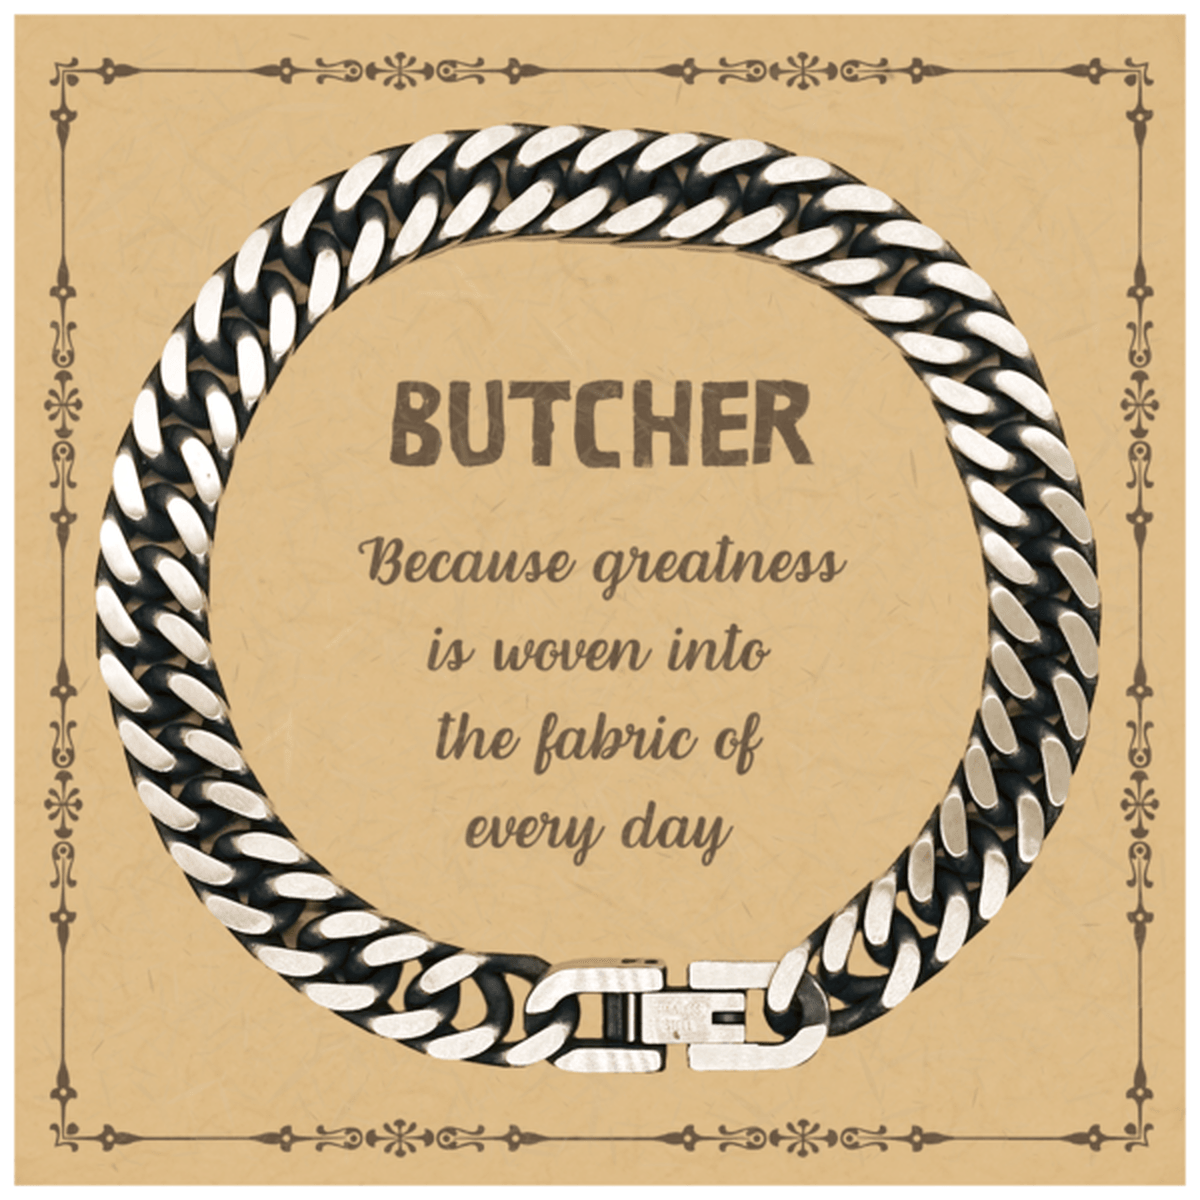 Sarcastic Butcher Cuban Link Chain Bracelet Gifts, Christmas Holiday Gifts for Butcher Birthday Message Card, Butcher: Because greatness is woven into the fabric of every day, Coworkers, Friends - Mallard Moon Gift Shop